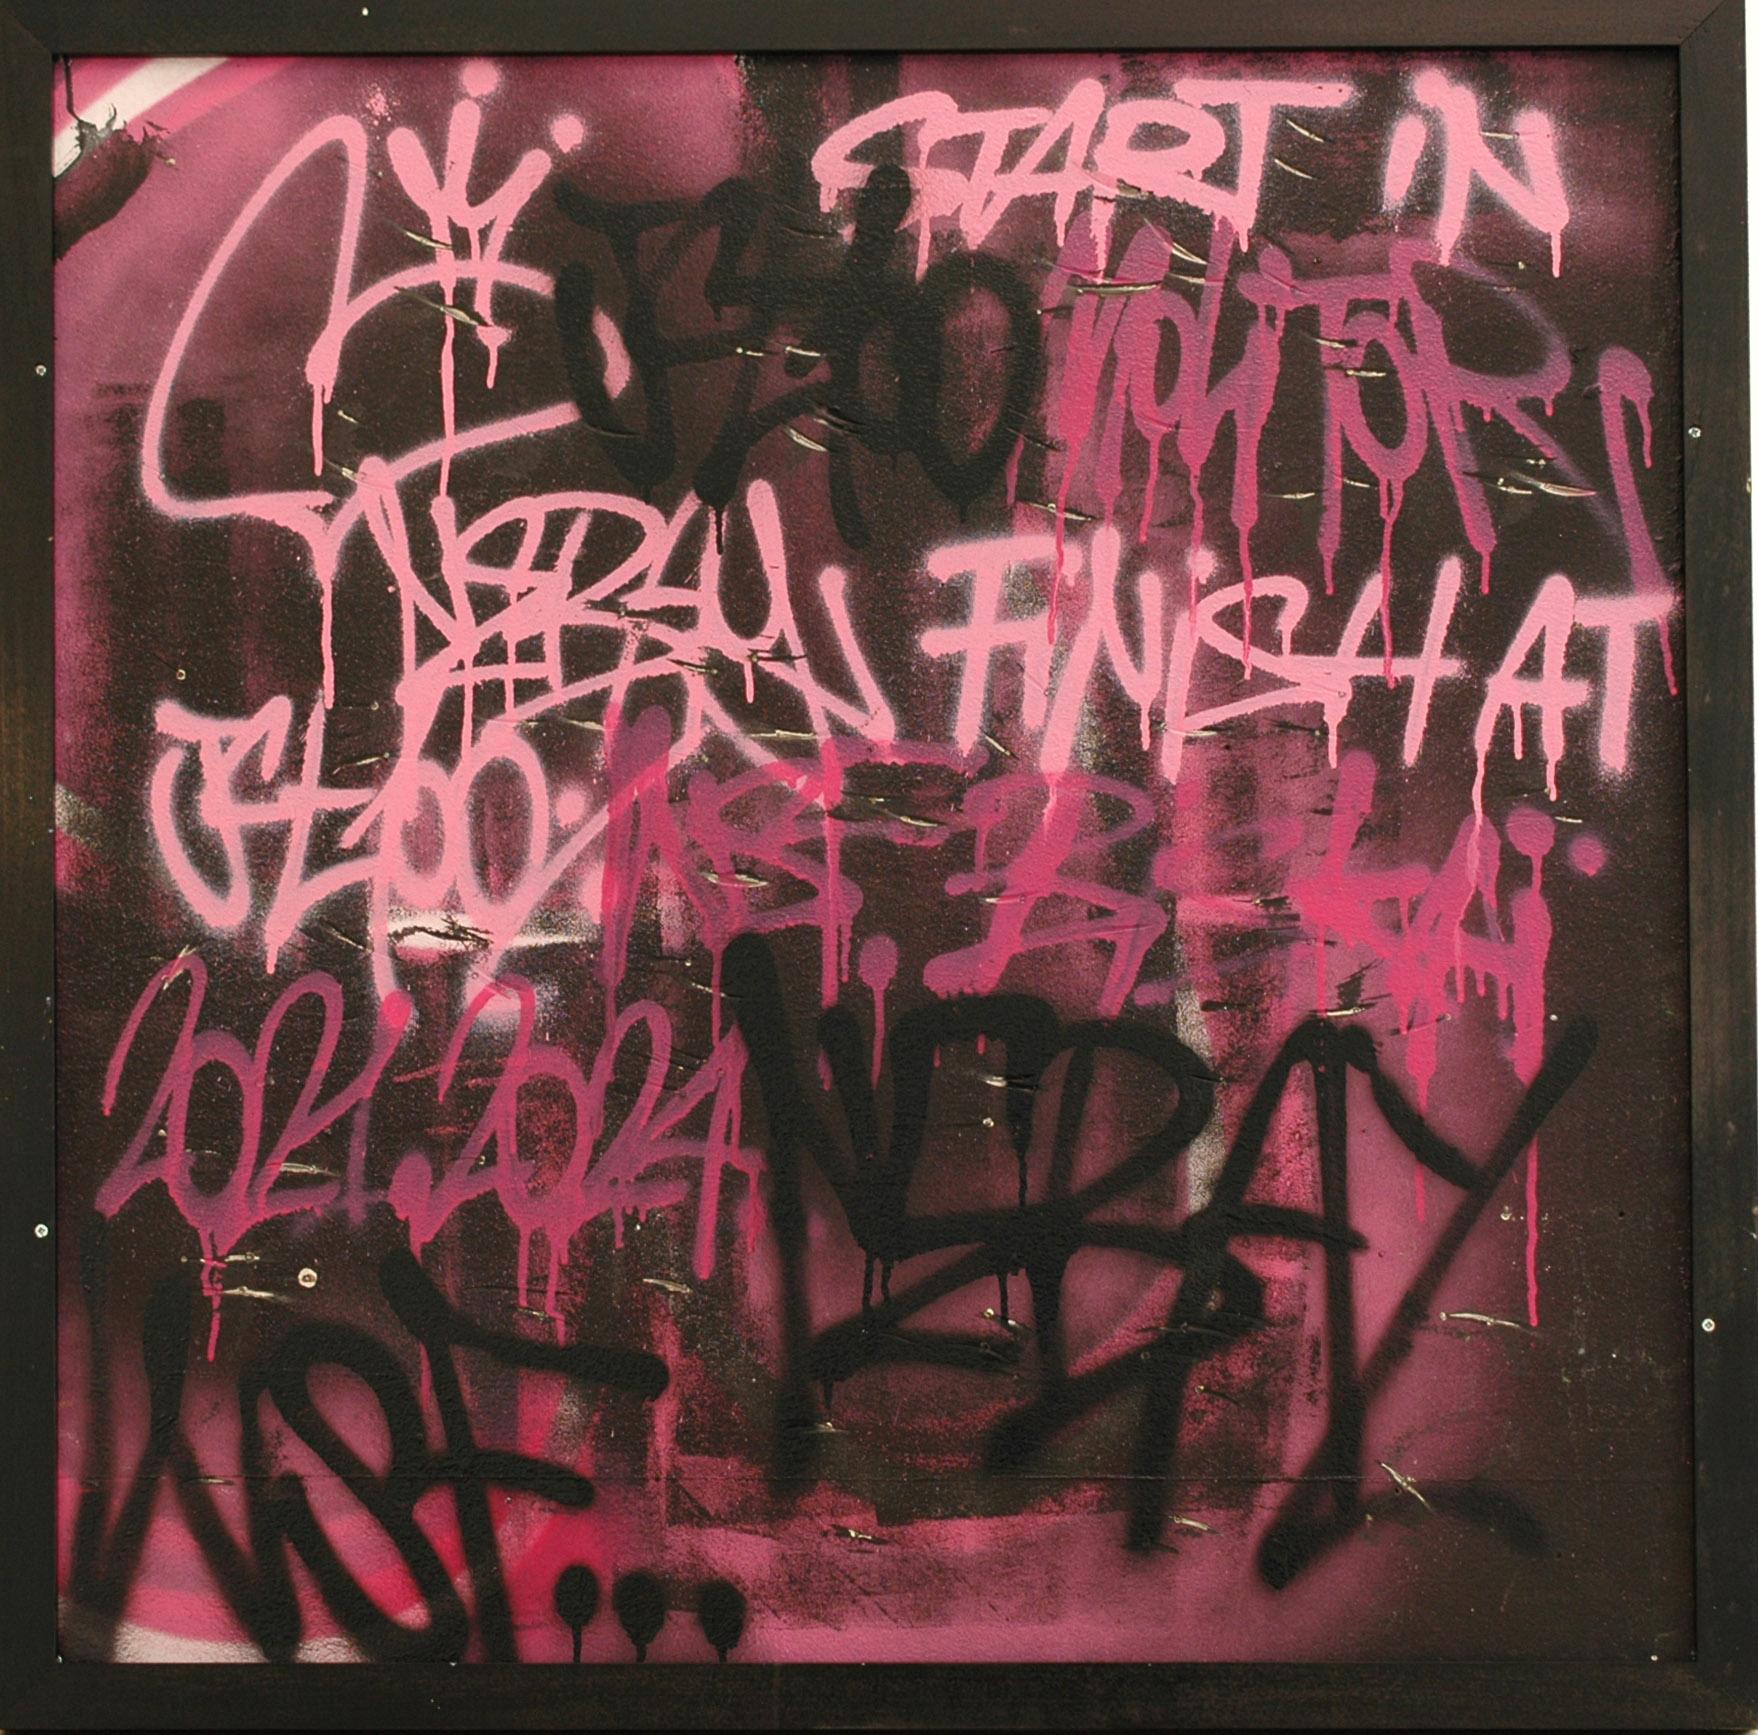 Spray and acrylic on canvas
100 x 100 cm (39.4 x 39.4 in)
Unique artwork
black cardboard (105 x 105 x 6 cm) - (41.3 x 41.3 x 2.4 in)
Signed by the artist
Certificate of authenticity